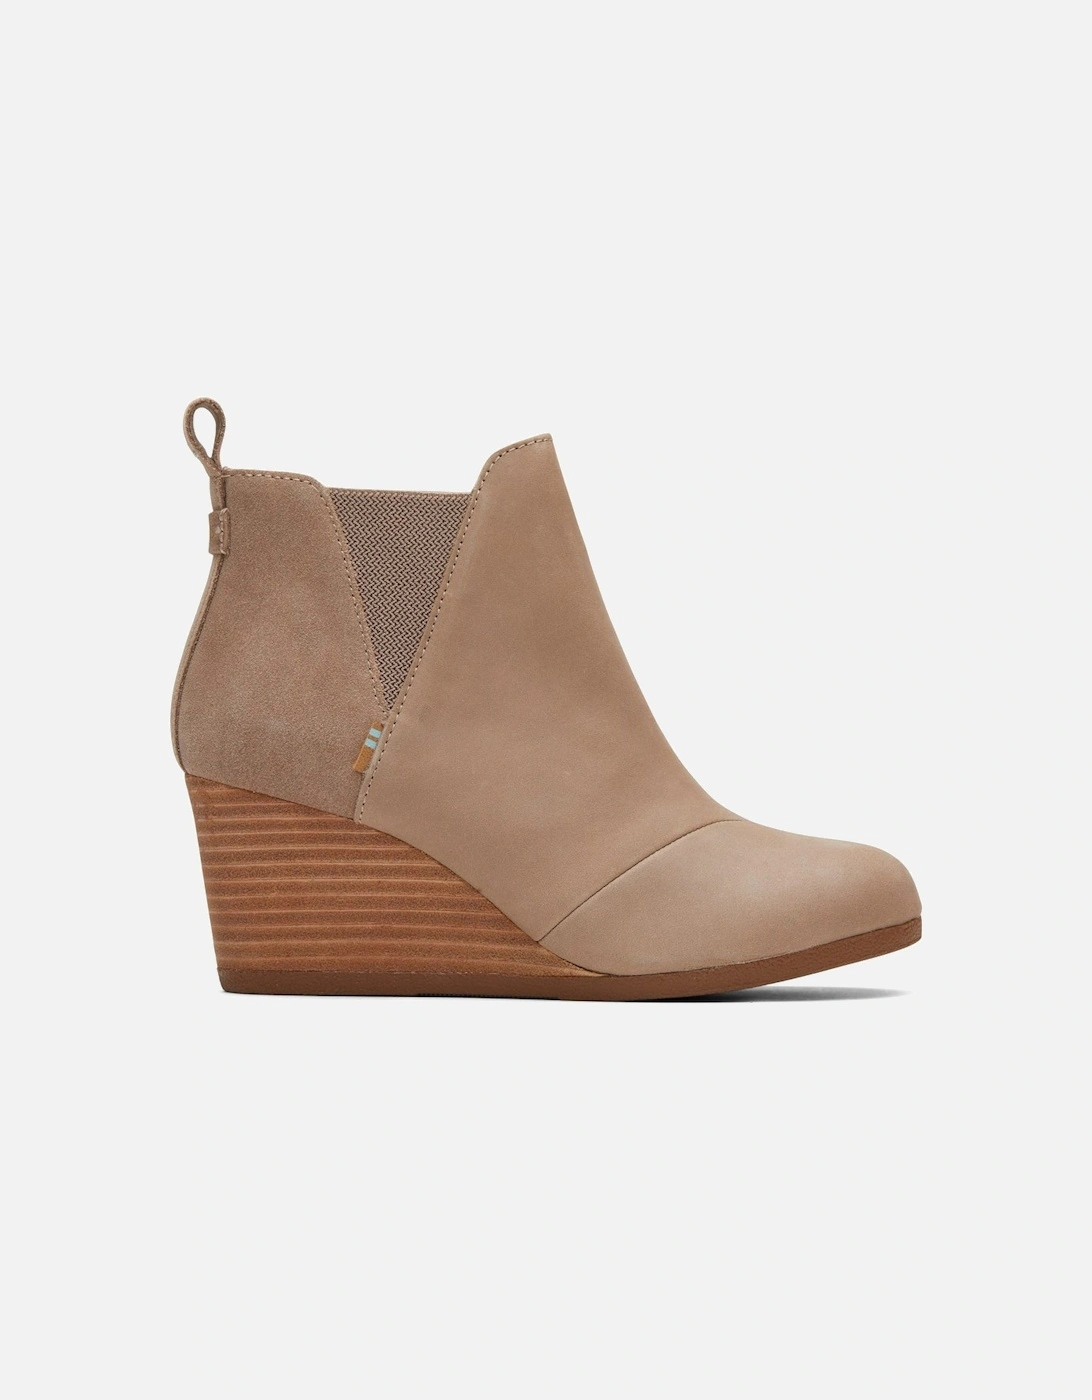 Kelsey Womens Ankle Wedge Boots